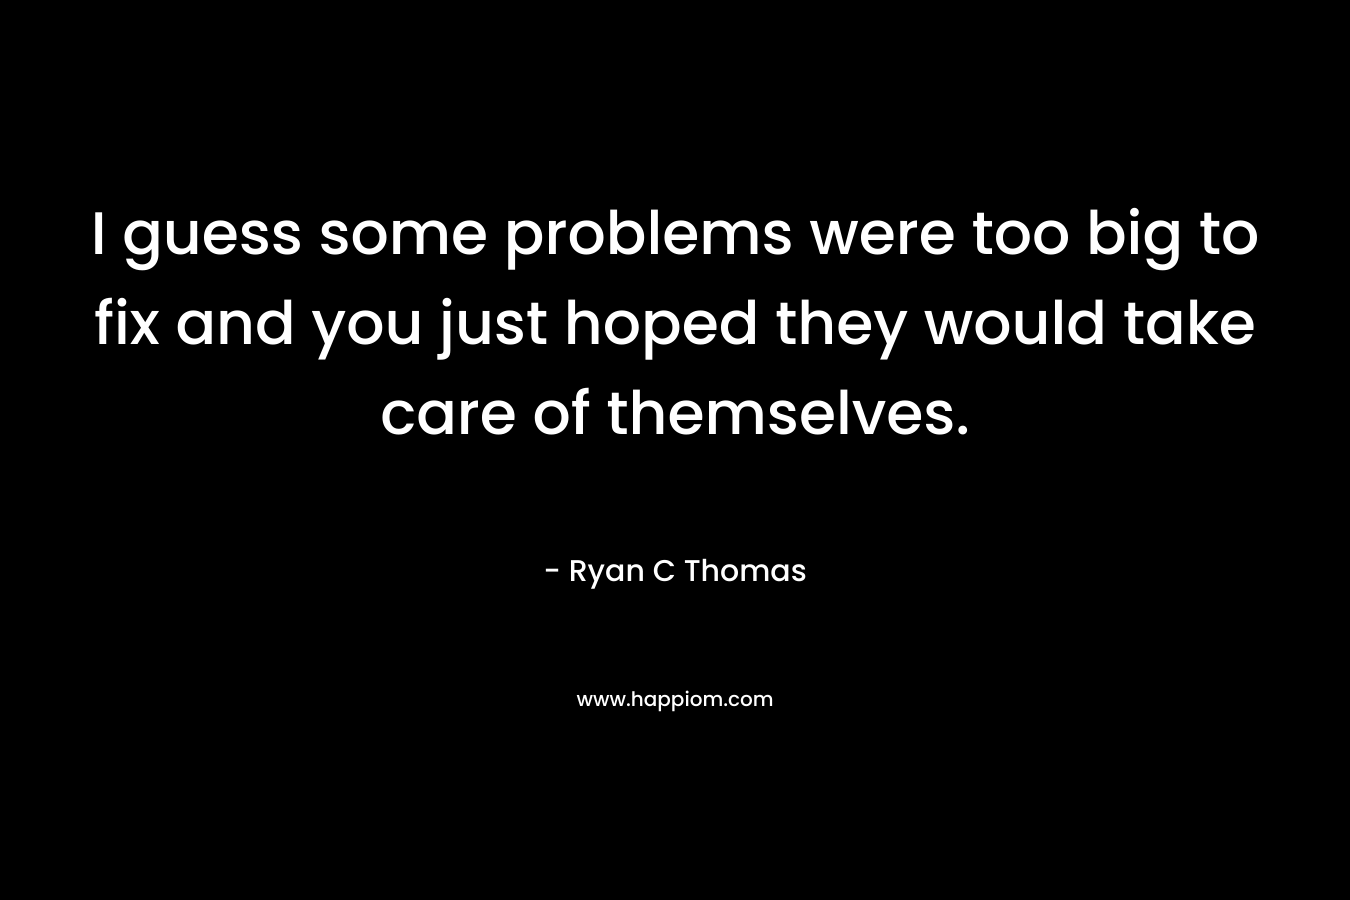 I guess some problems were too big to fix and you just hoped they would take care of themselves. – Ryan C Thomas